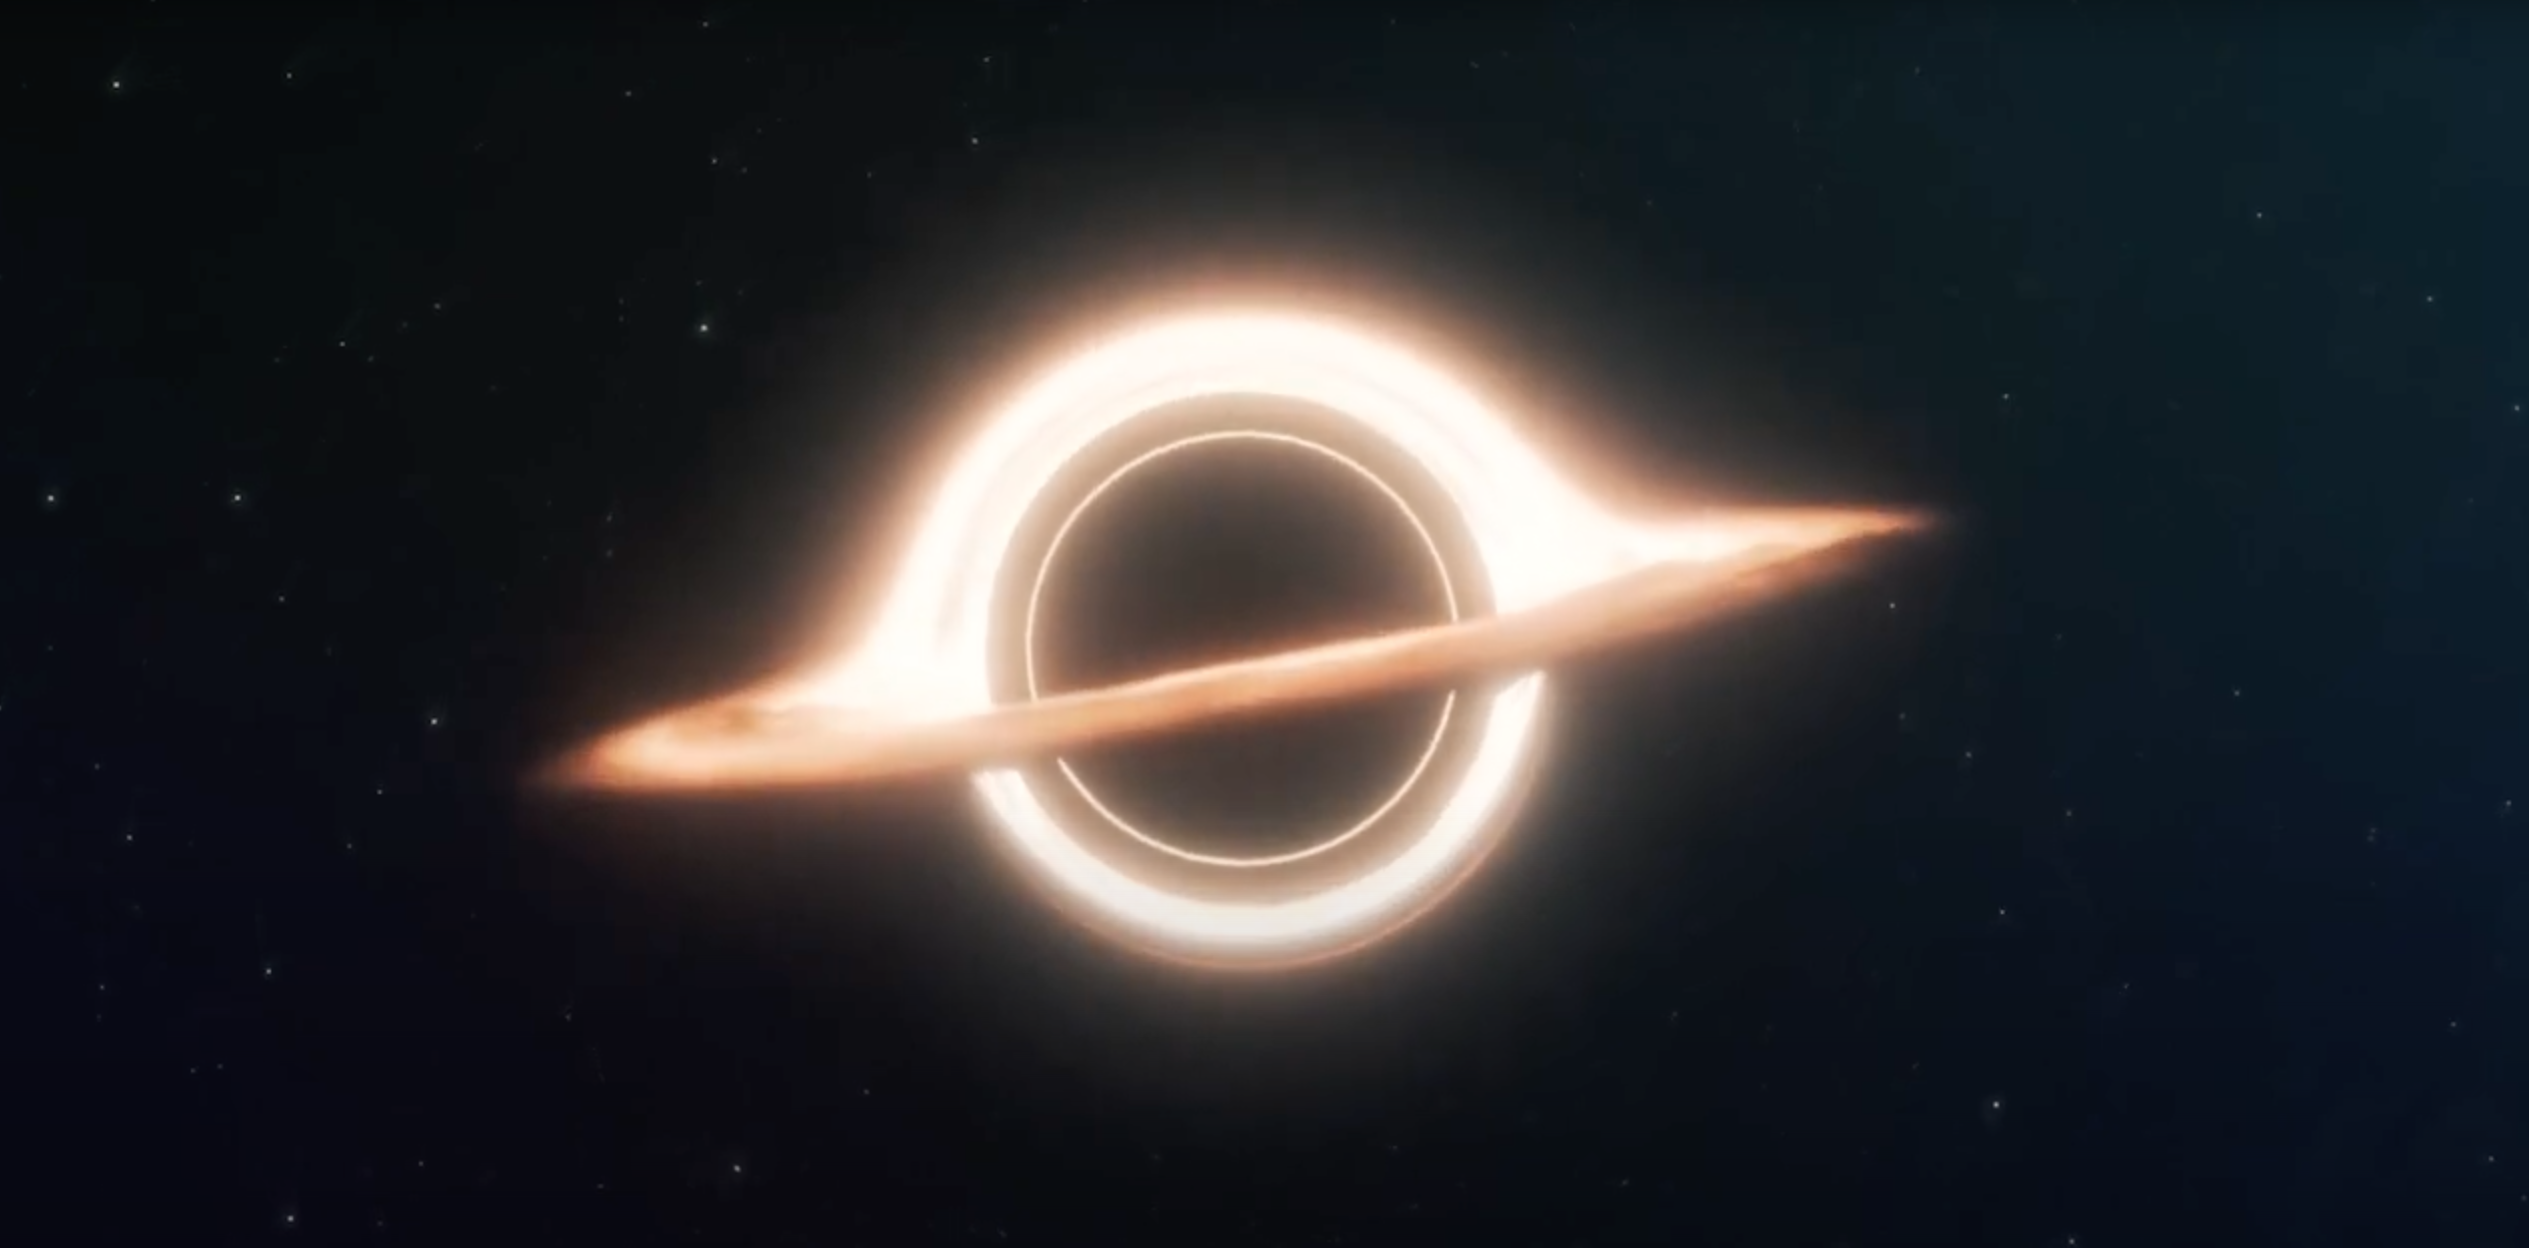 Artist's rendering of a Black Hole.